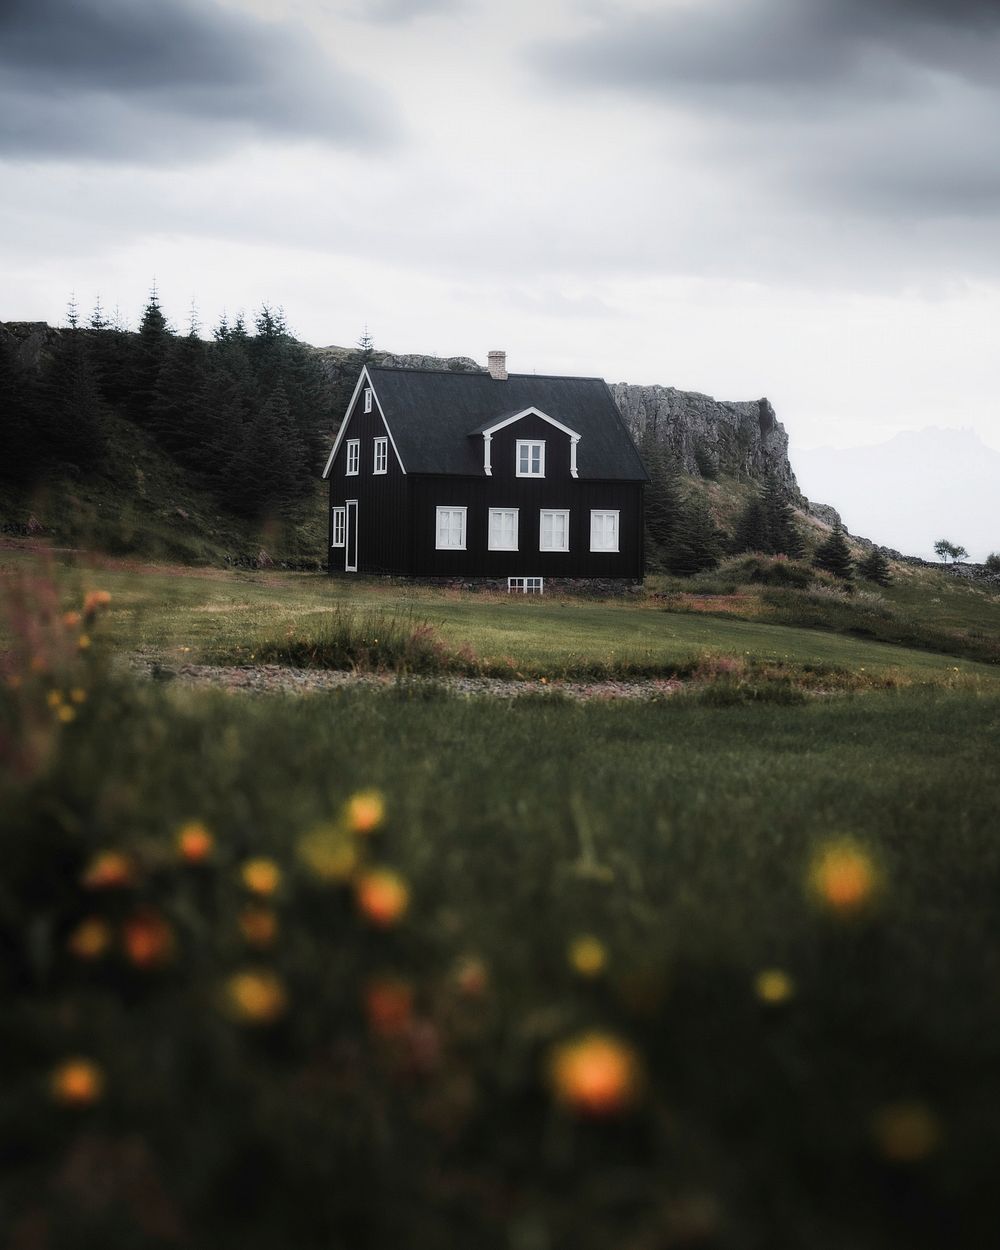 Traditional Icelandic house on the East coast of Iceland